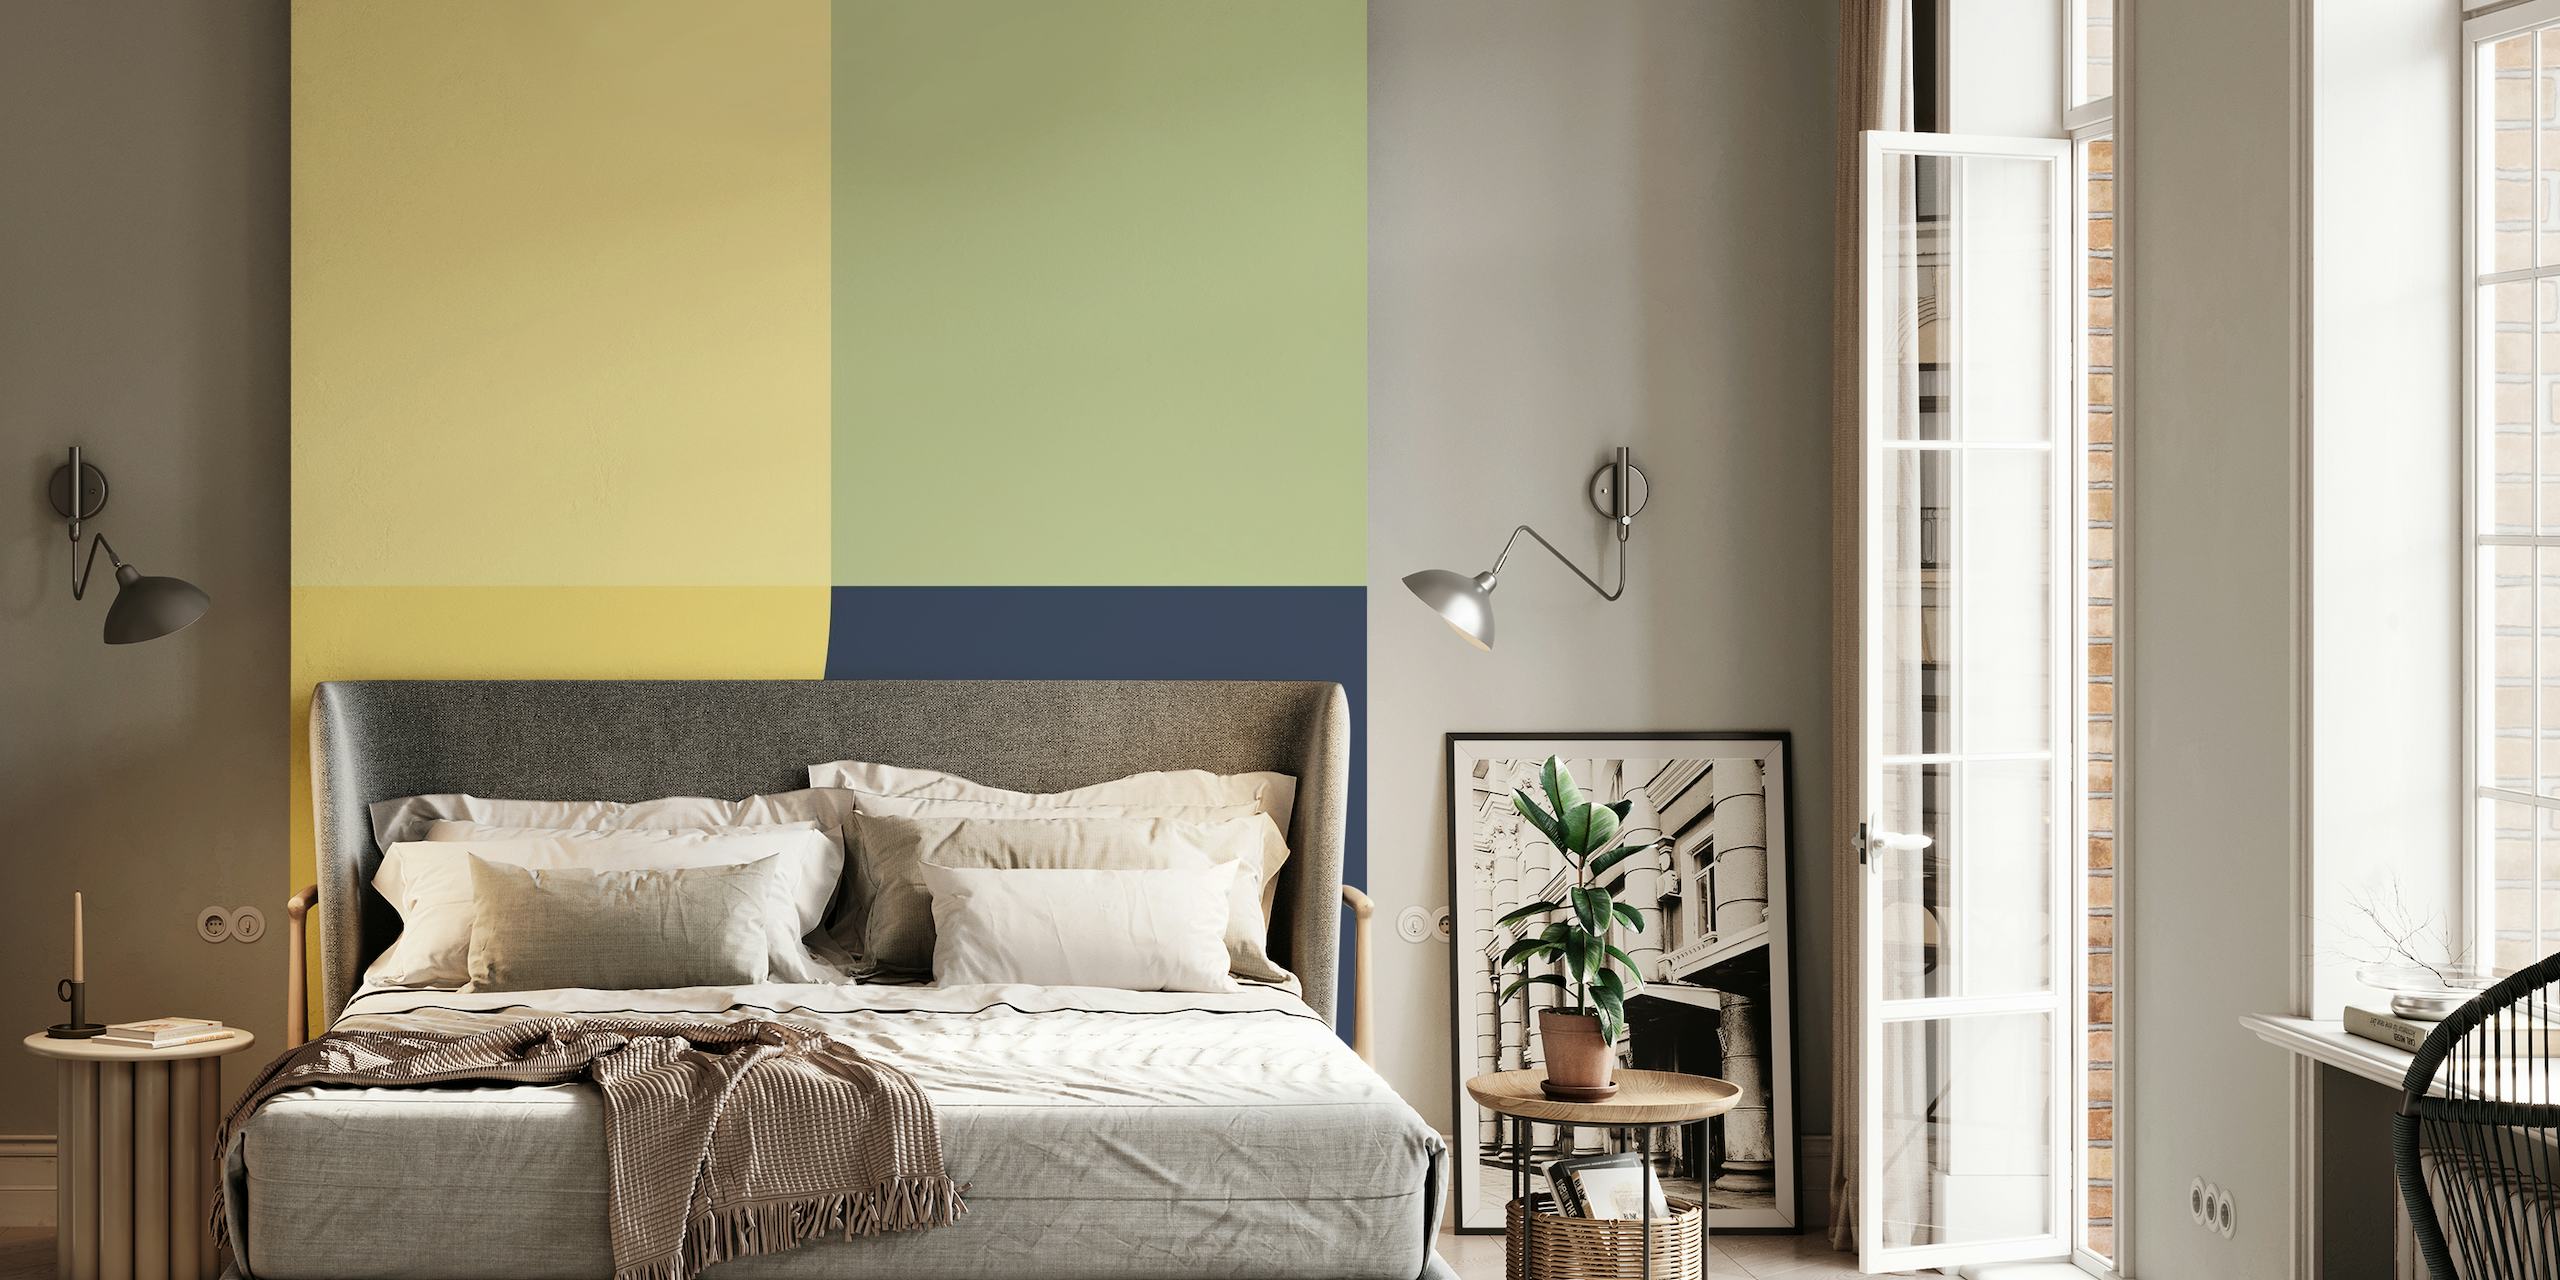 Contemporary 07 abstract geometric wall mural with cream, sage green, and navy hues